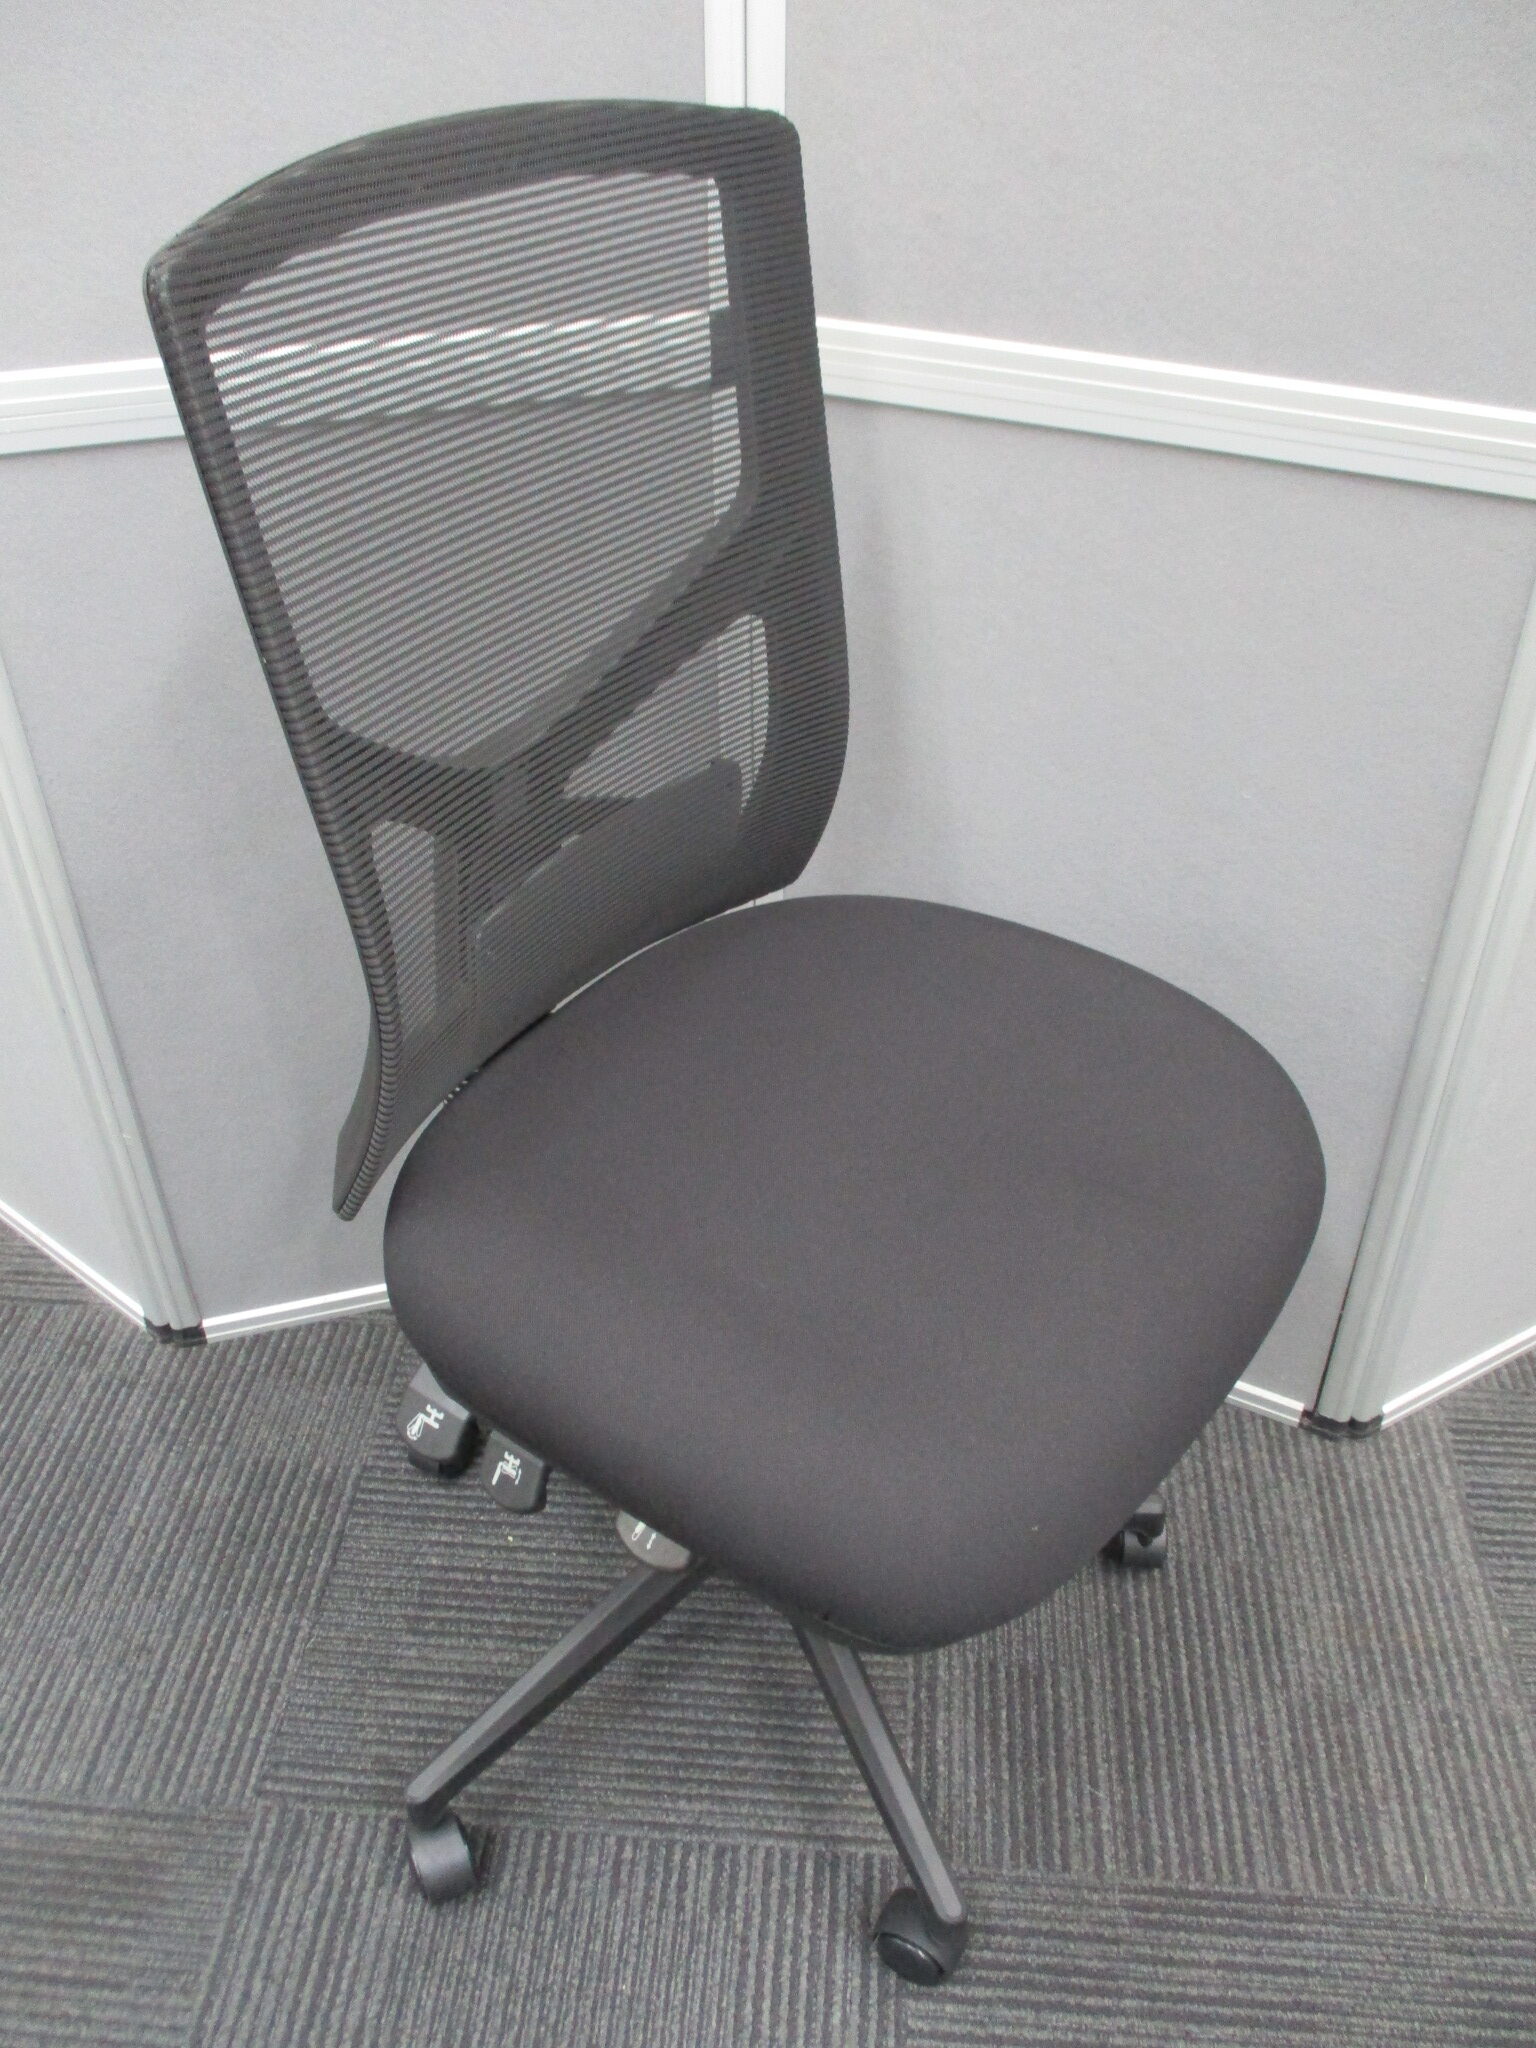 New Breeze Chairs $290